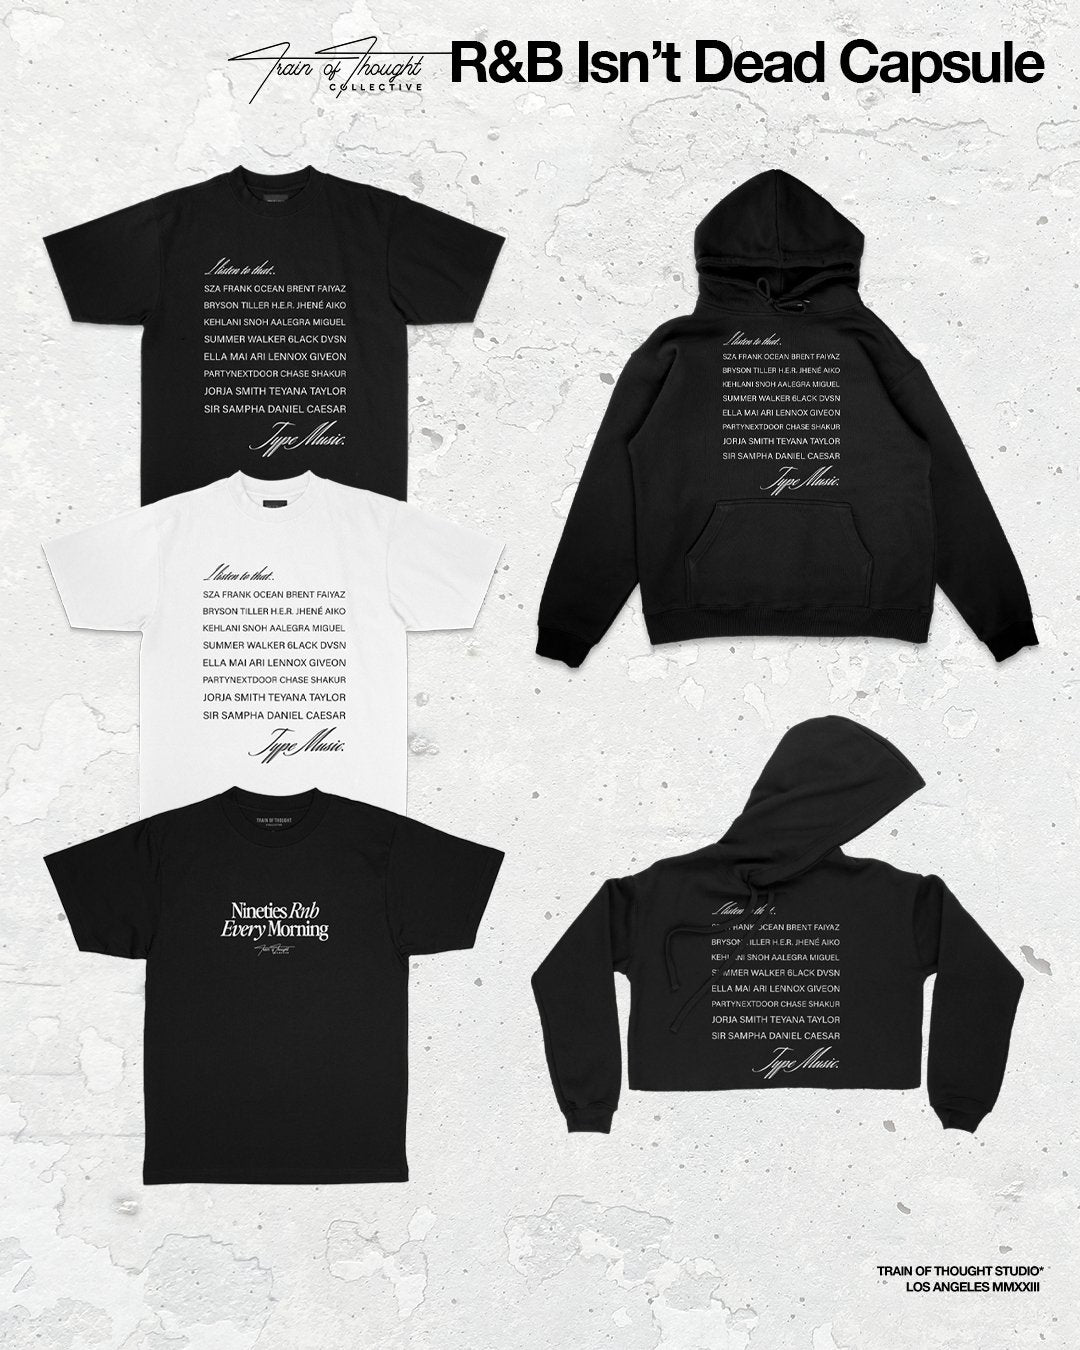 R&B Isn't Dead Capsule - trainofthoughtcollective